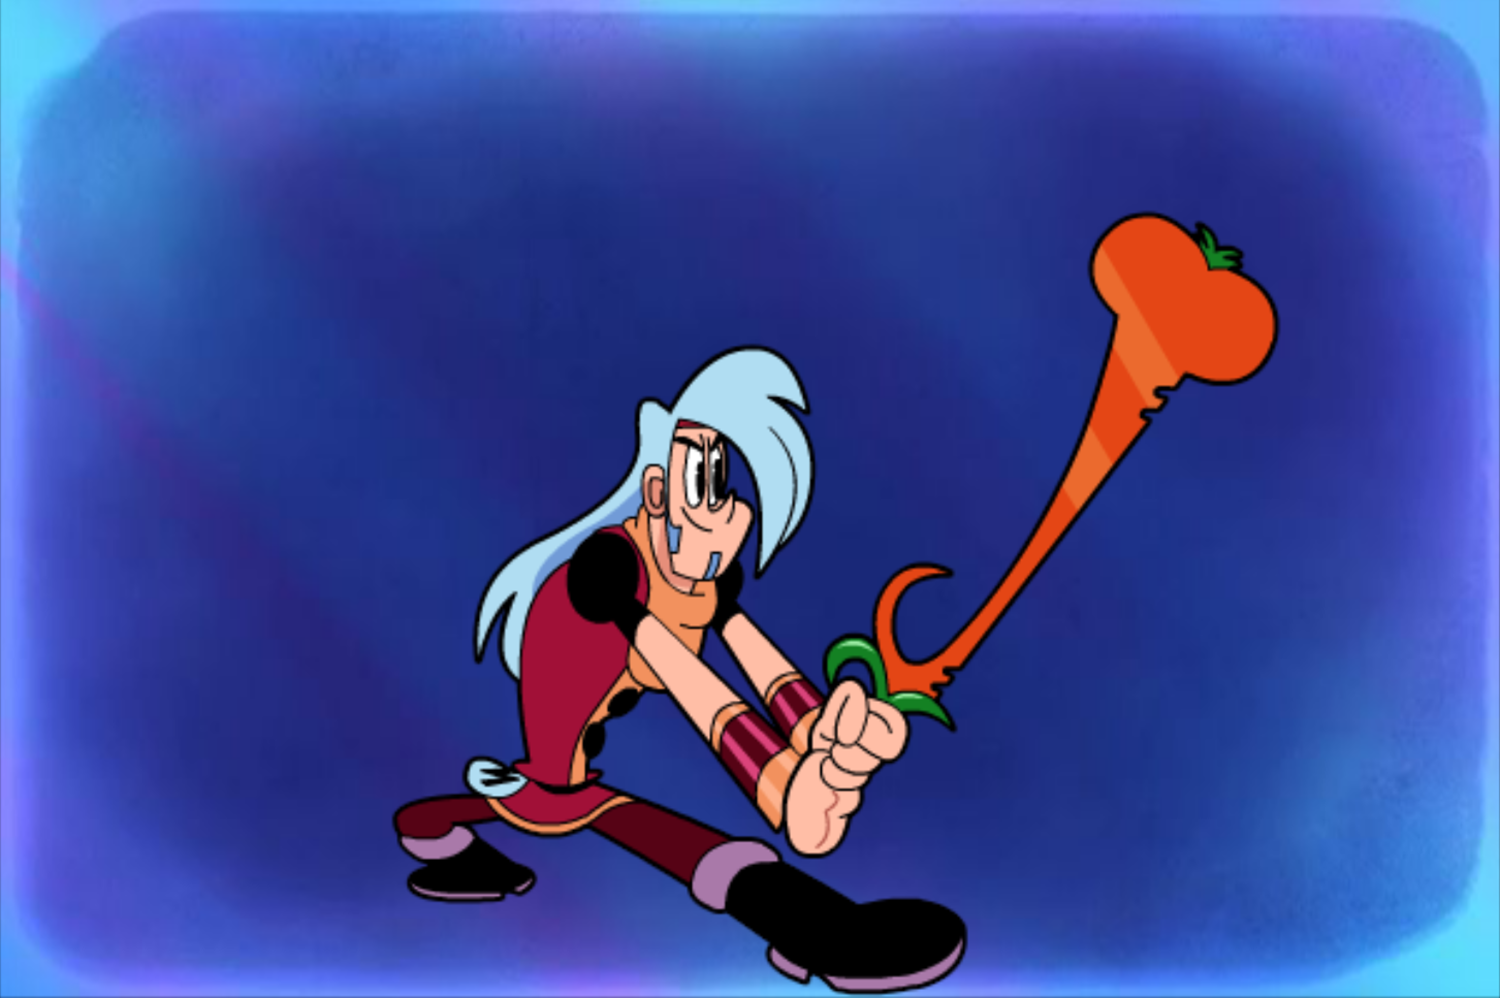 Mighty MagiSwords Hoversword Hustle Game Tomato Magisword Introduction Screenshot.